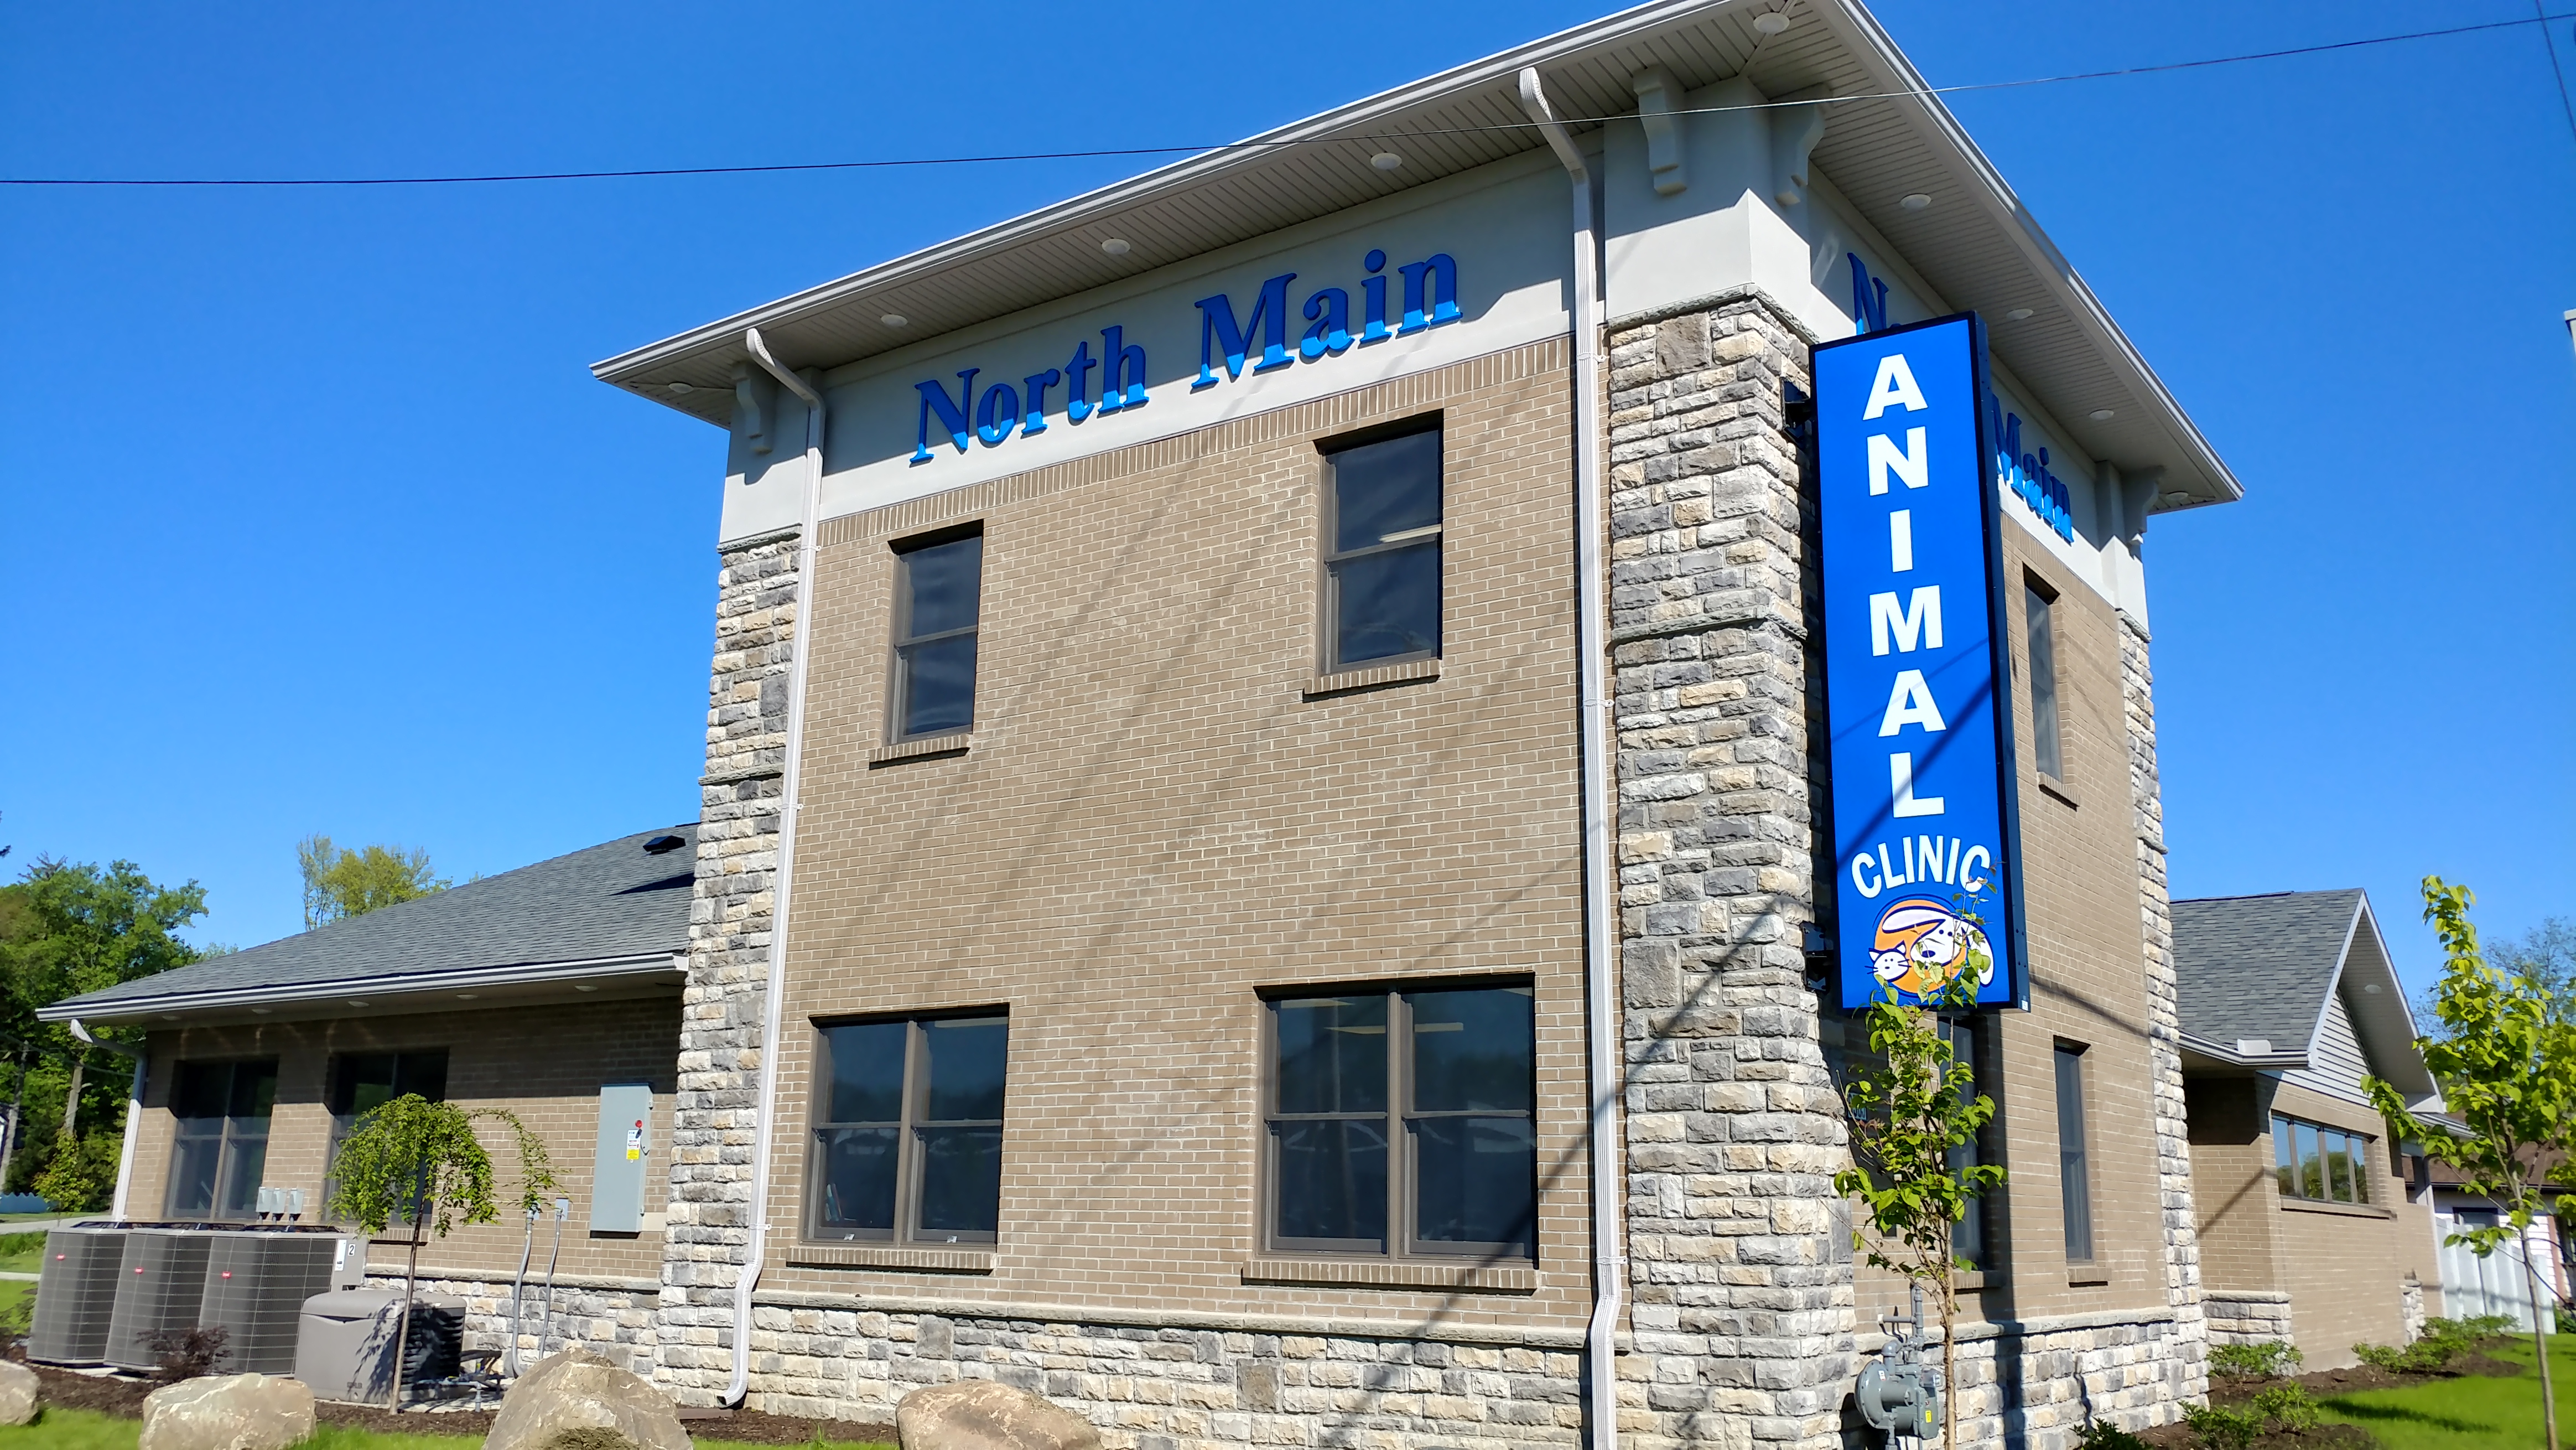 Carra Builders - North Main Animal Clinic Image | ProView